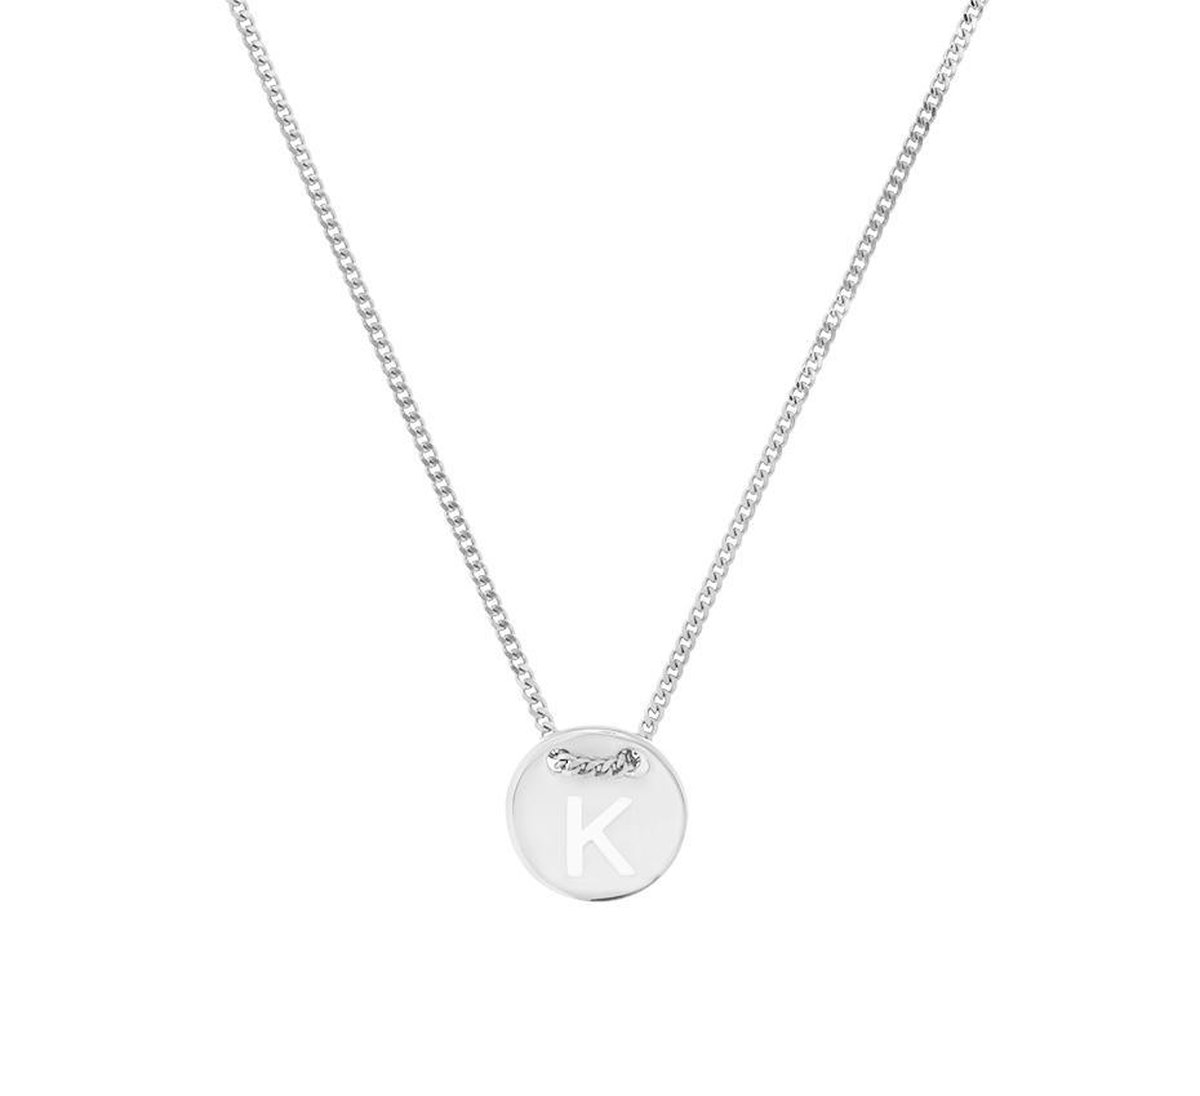 The Fashion Jewelry Collection Ketting Letter K 1,3 mm 41 + 4 cm - Zilver Gerhodineerd